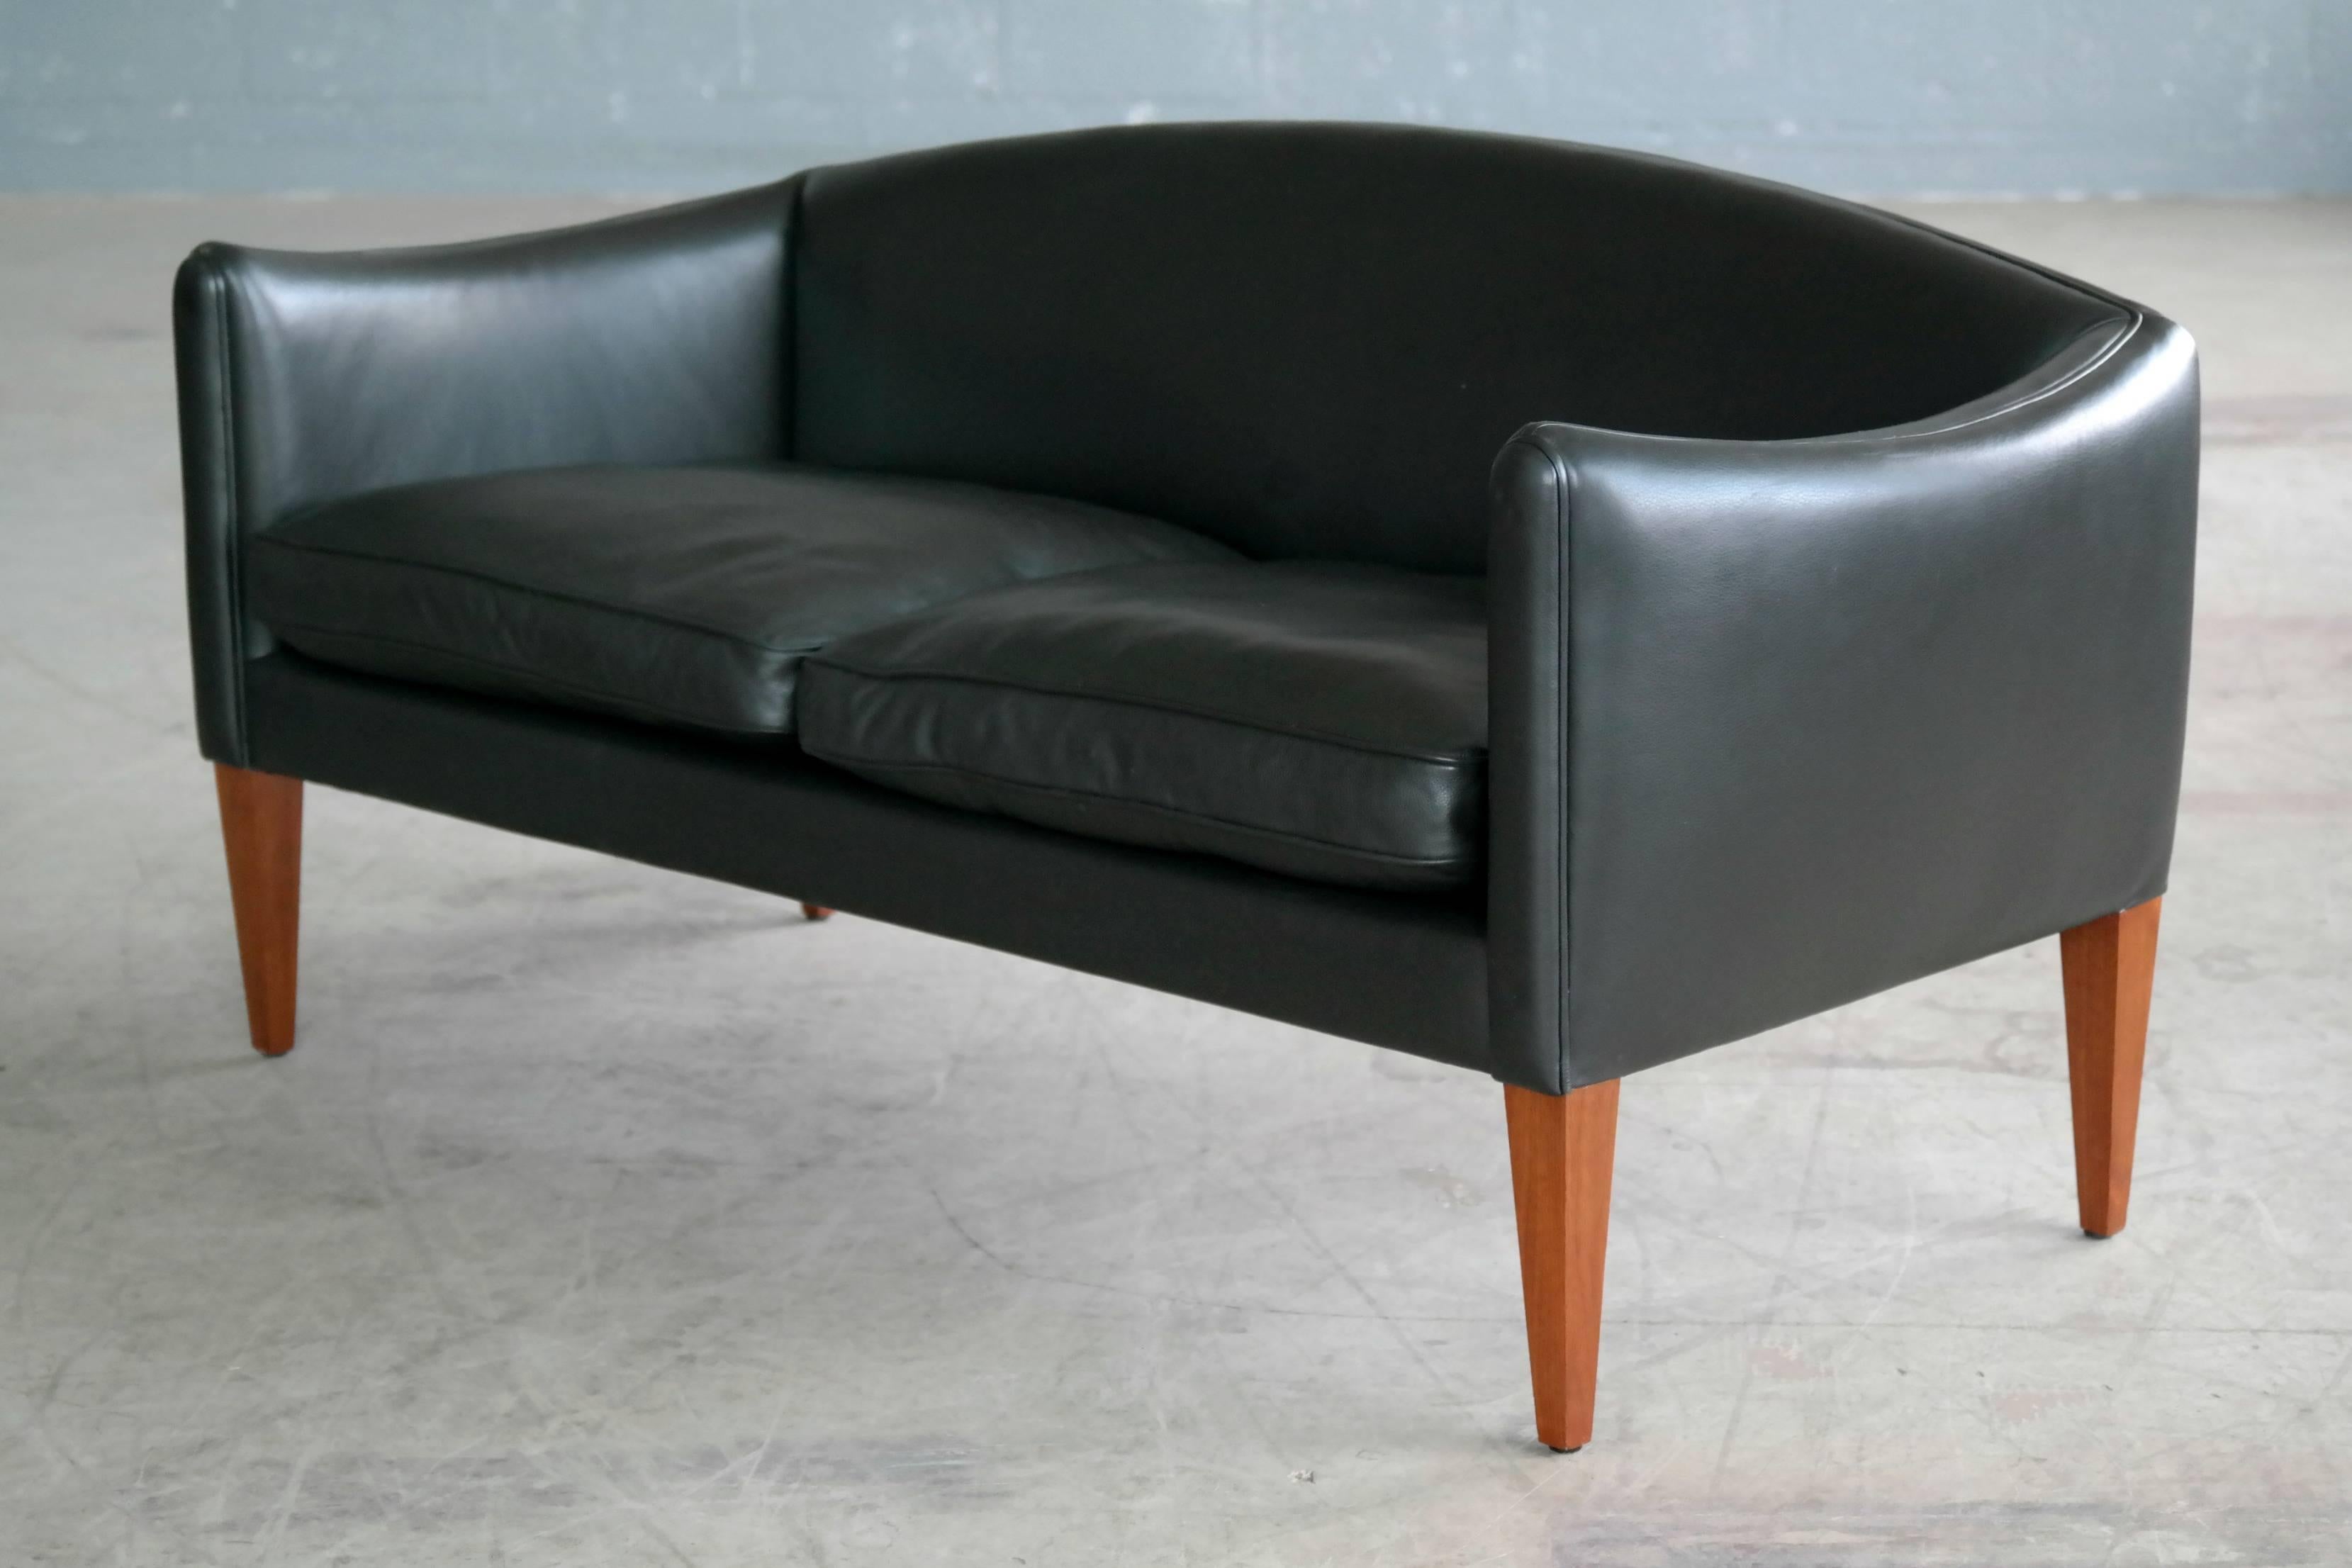 Exuberant sought after Illum Wikkelsø 1960s two-seat sofa or settee for Holger Christiansen in supple black leather and solid teak legs. Minimal age wear excellent overall condition.